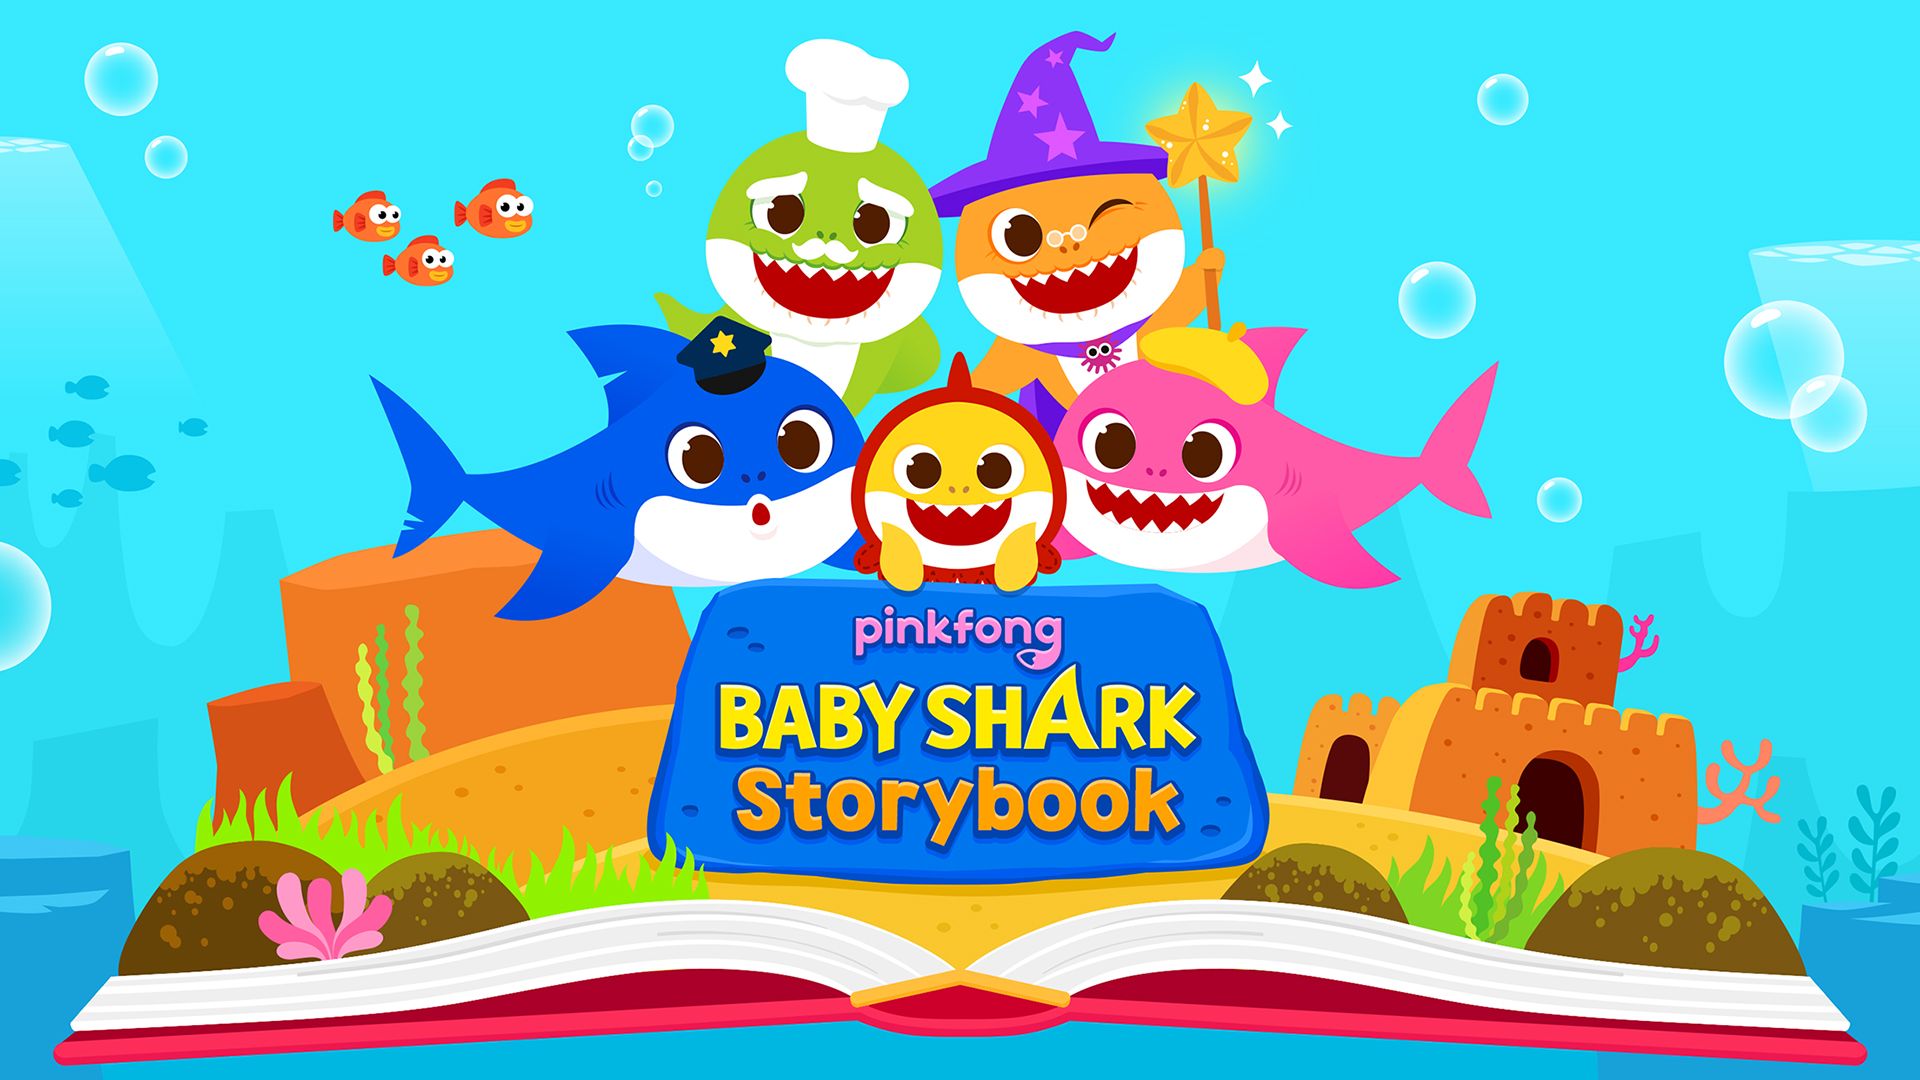 Pinkfong Baby Shark Storybook: Amazon.ca: Appstore for Android.